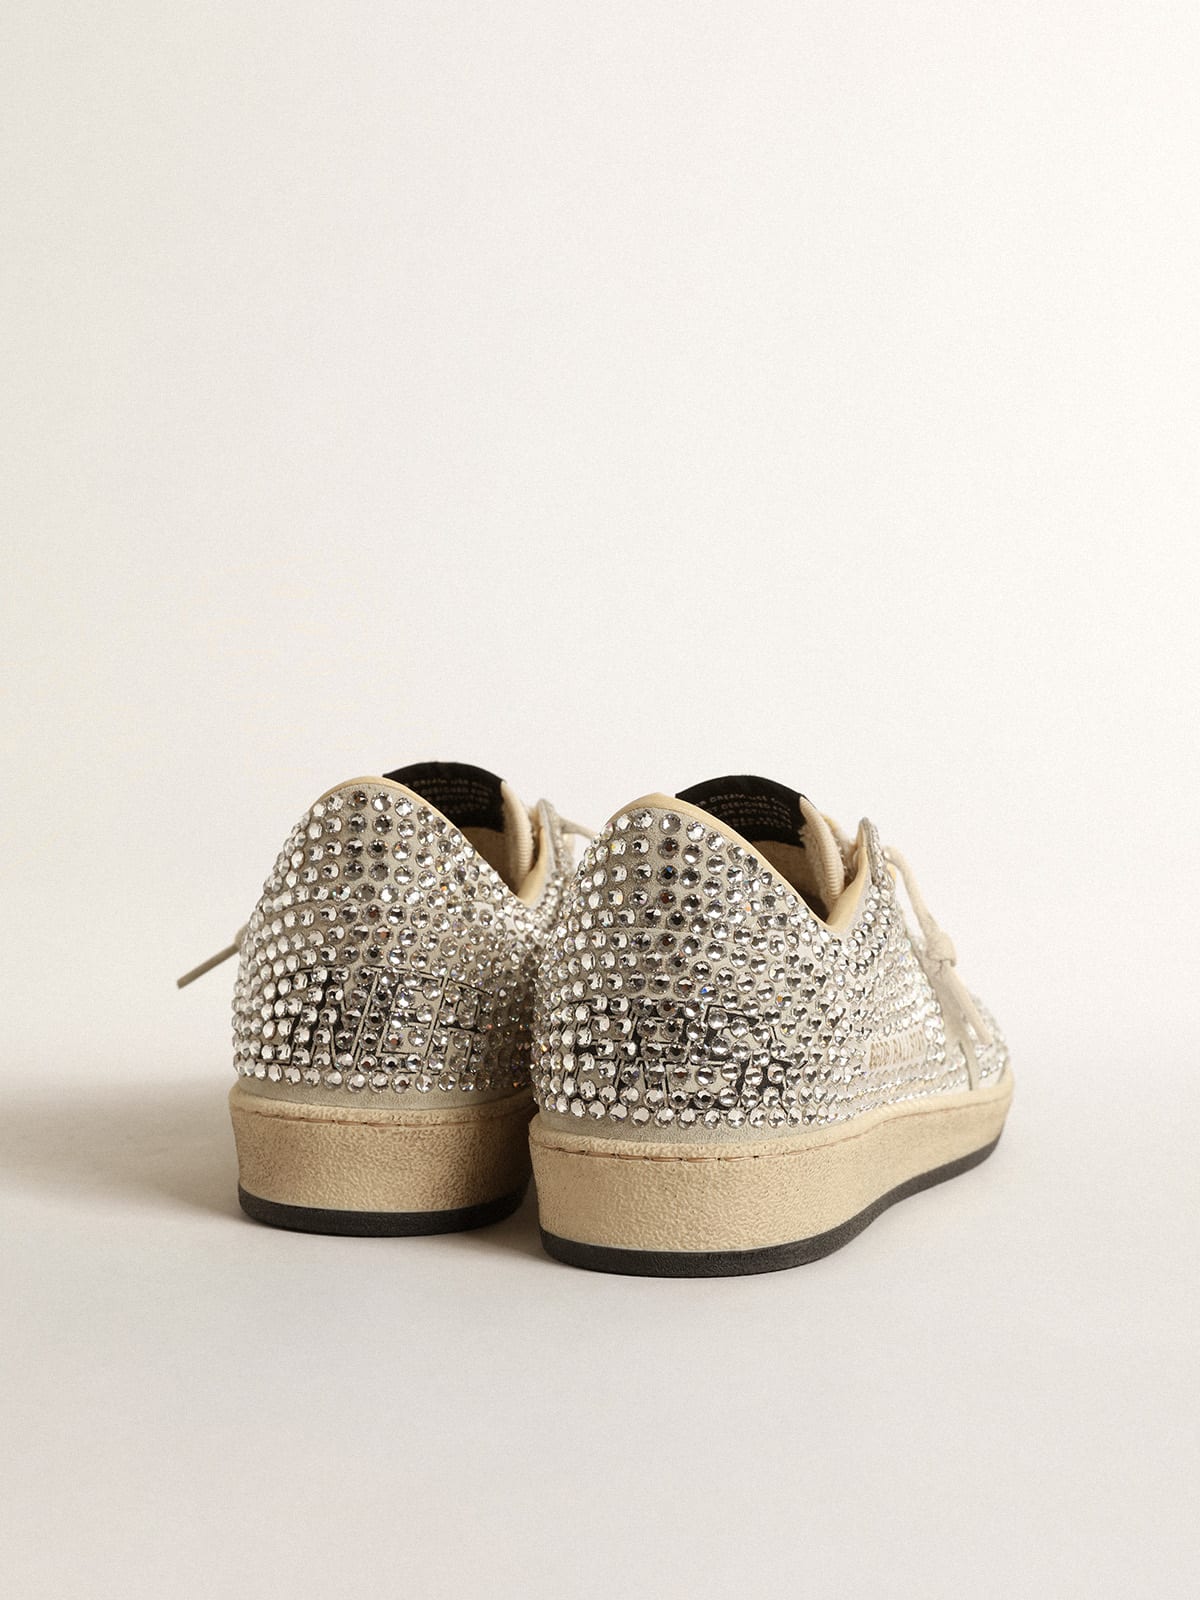 Golden Goose - Ball Star LTD with Swarovski crystals and gray suede star in 